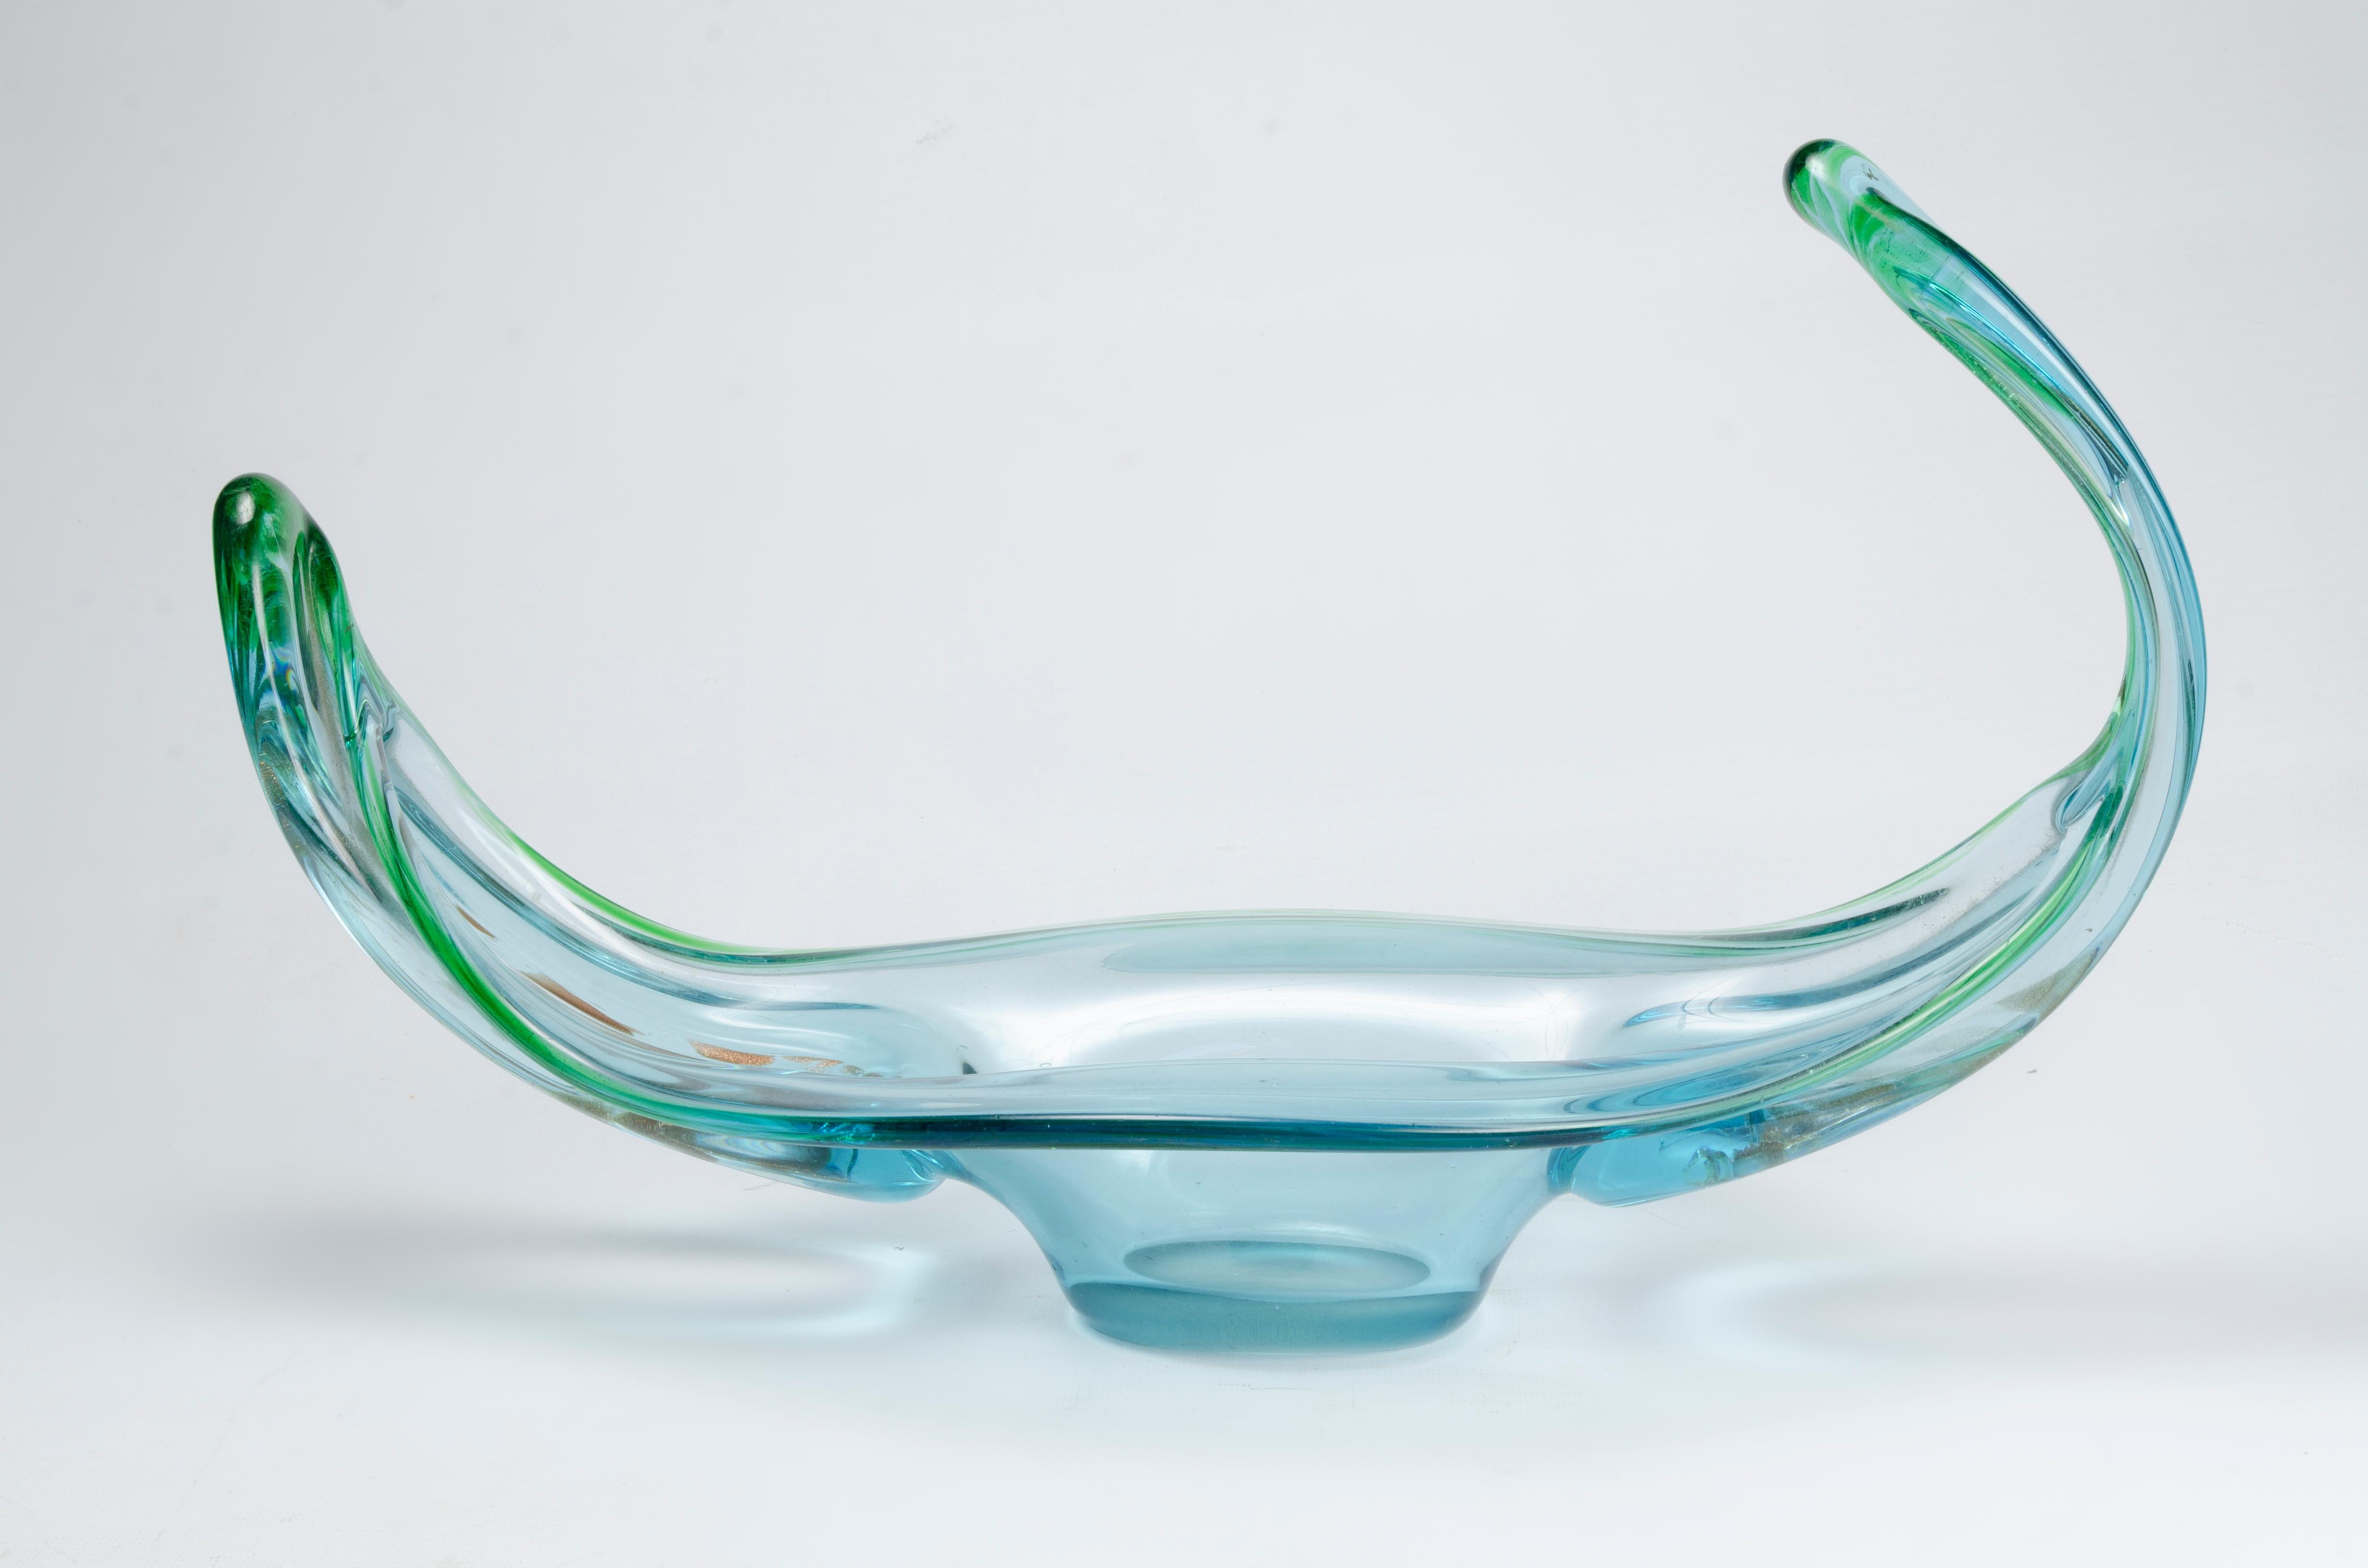 Murano glass center piece
Origin Italy Circa 1960
perfect condition
natural wear and tear from use
green and blue glass
On the islet of Murano, full of Renaissance houses and with its characteristic white lighthouse, the production of glass